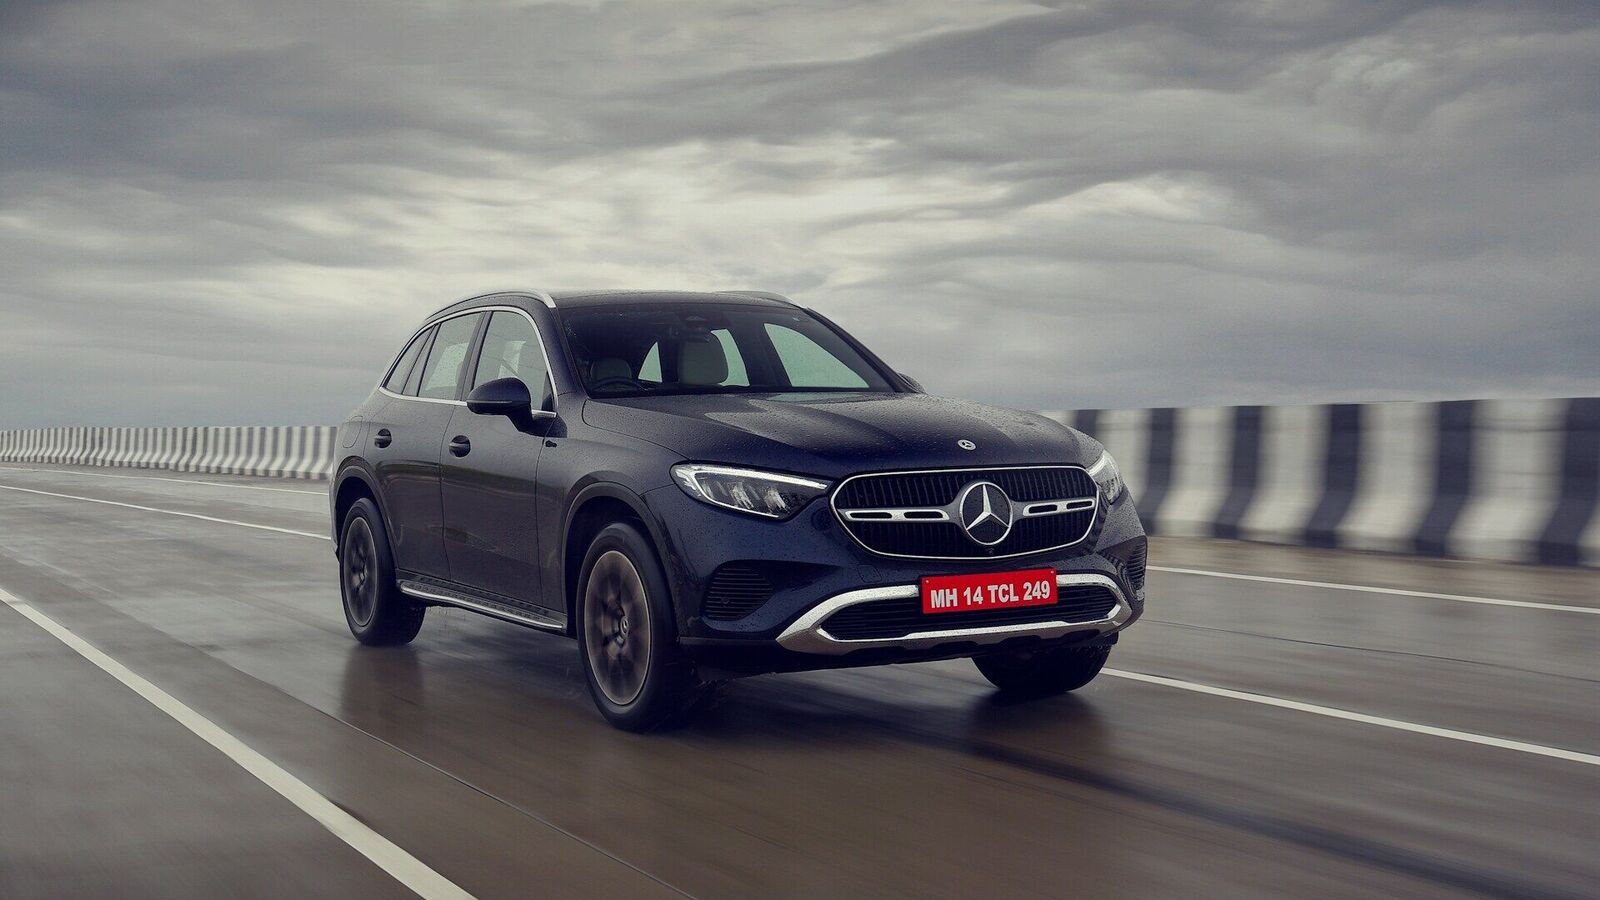 2023 Mercedes-Benz GLC 300 First Drive Review: New, but not